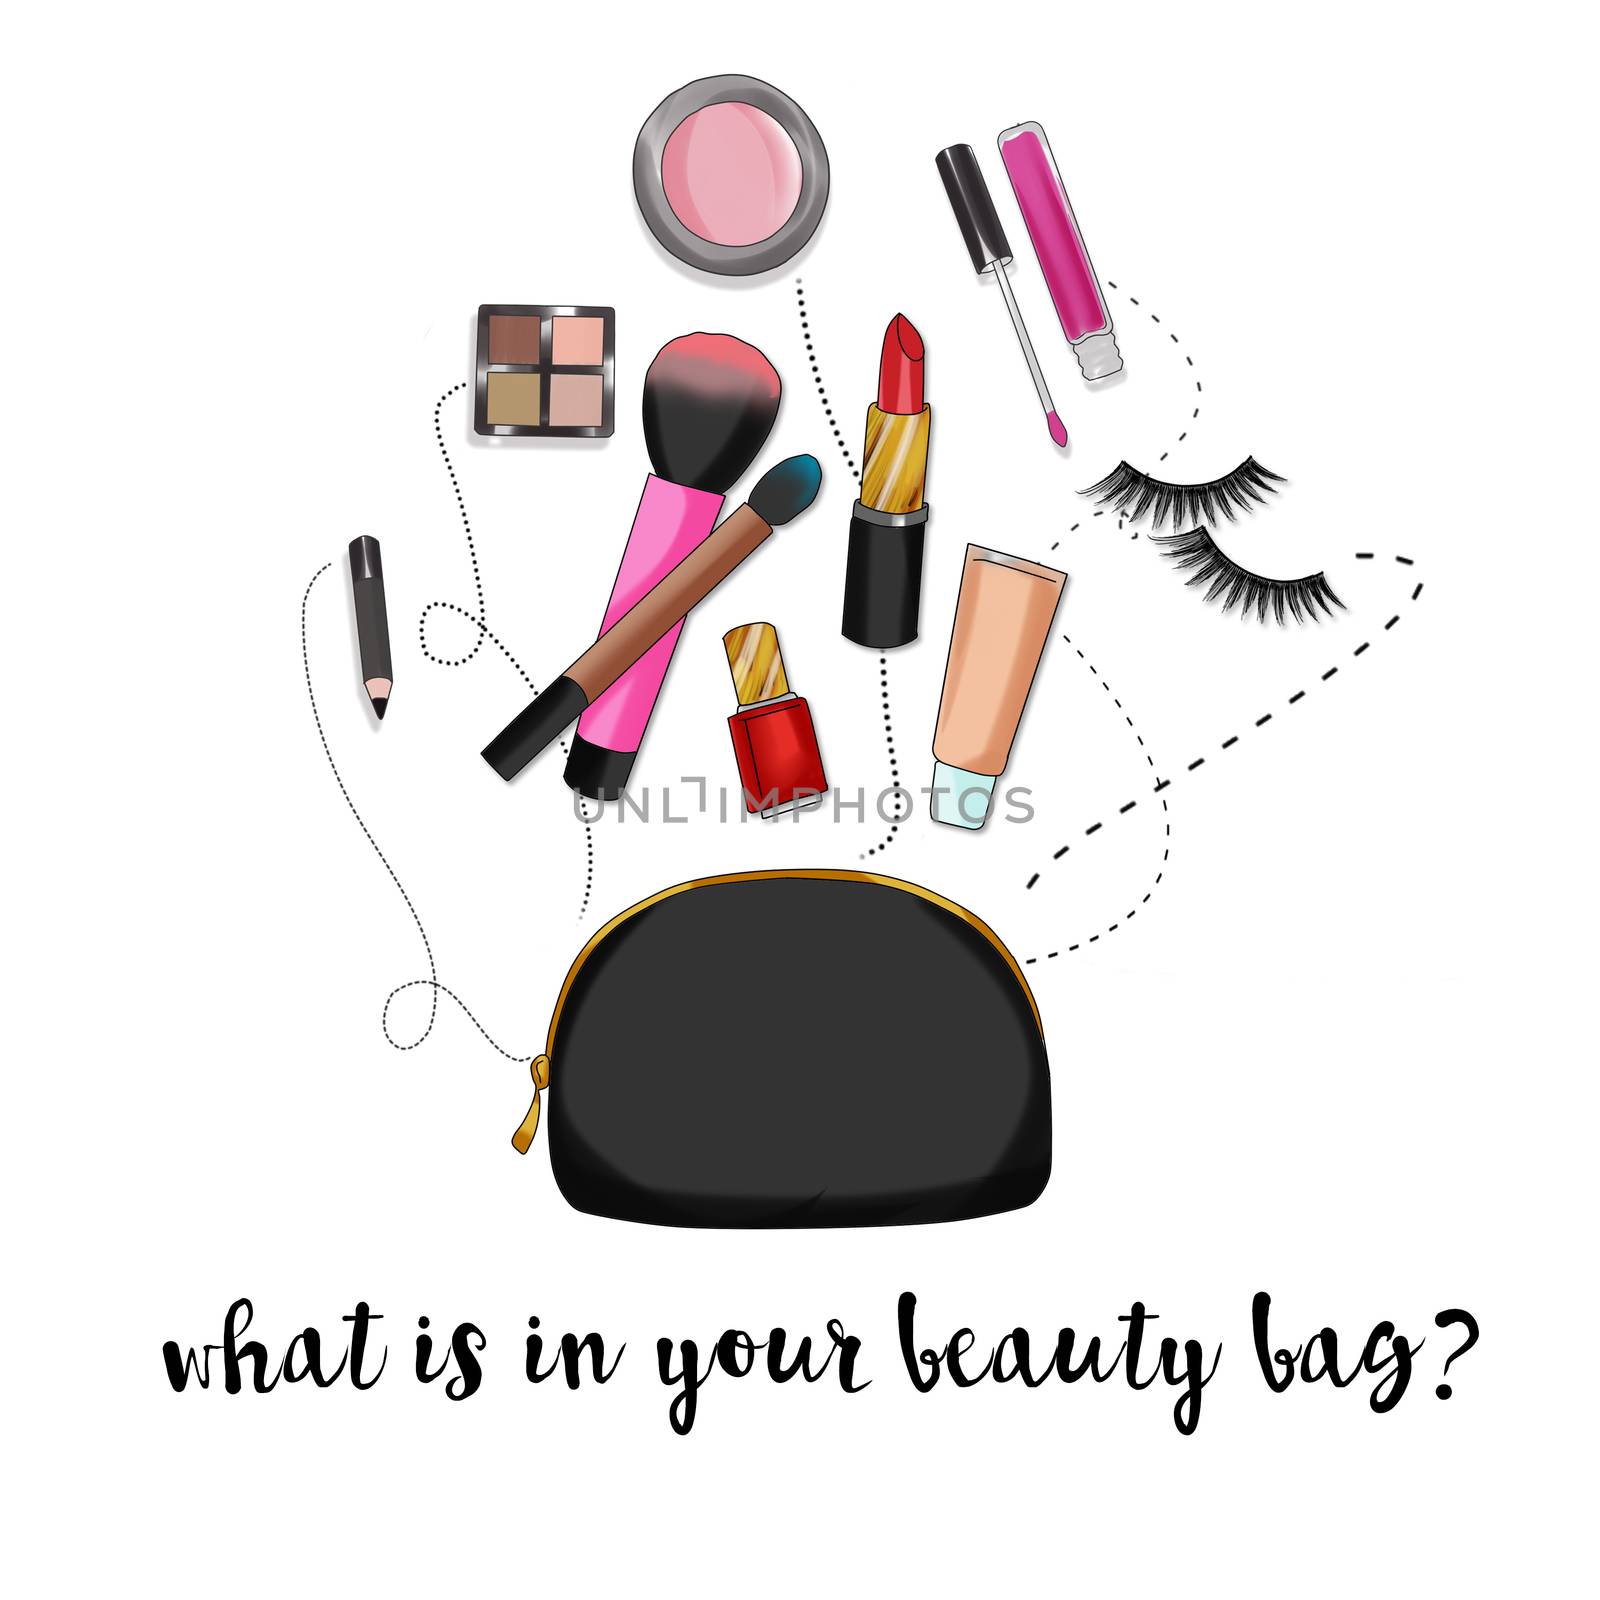 Fashion Illustration background - Beauty bag with make up and cosmetics